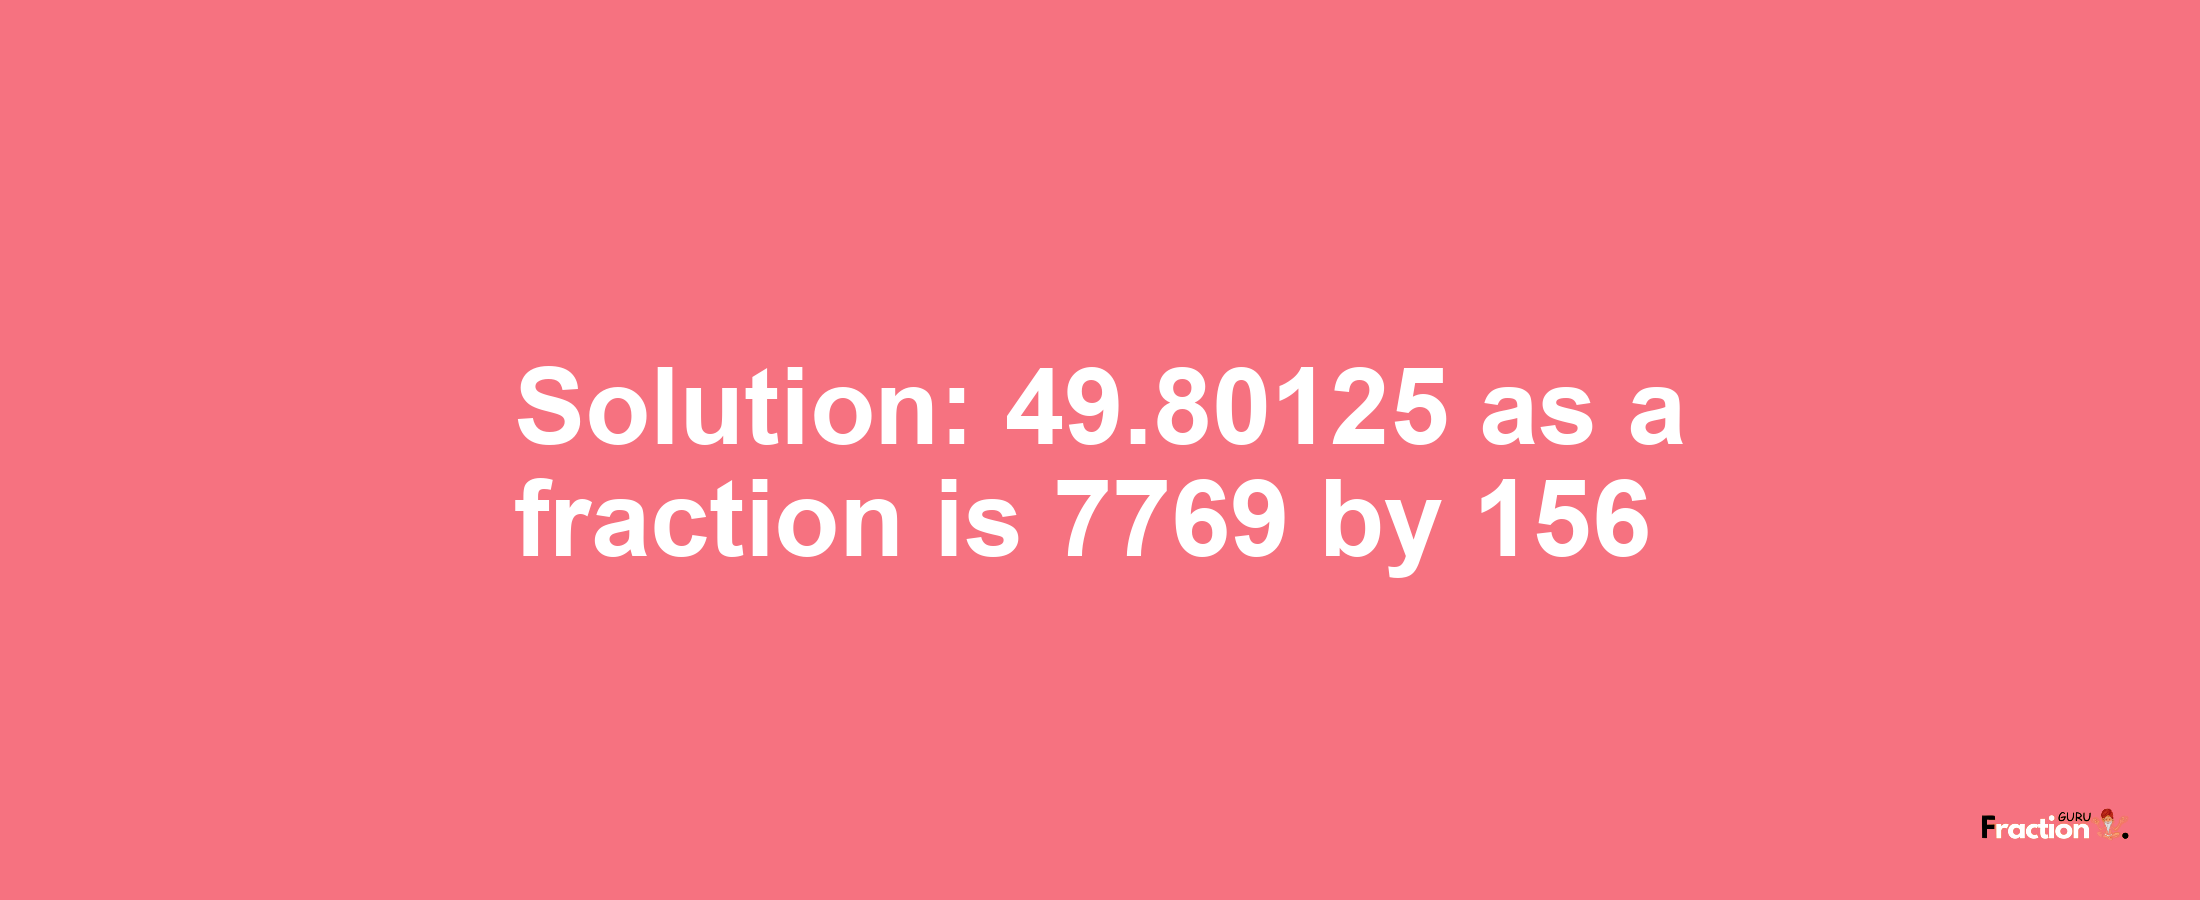 Solution:49.80125 as a fraction is 7769/156